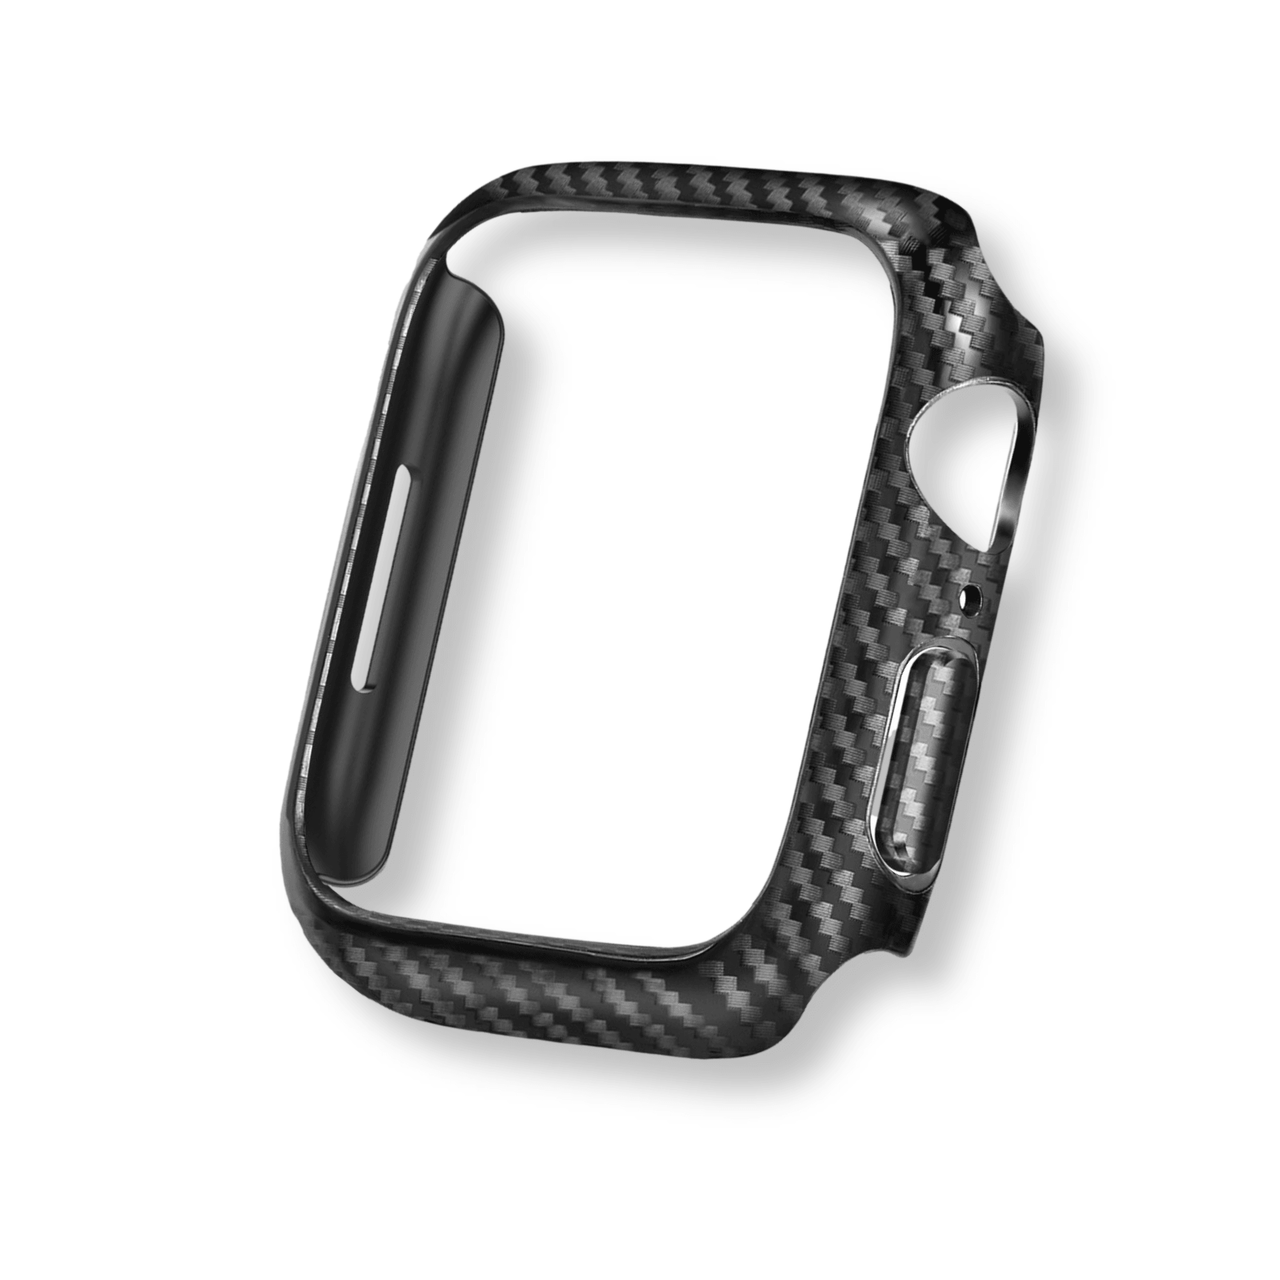 Carbon Fiber Protective Case for Apple Watch - watchband.direct